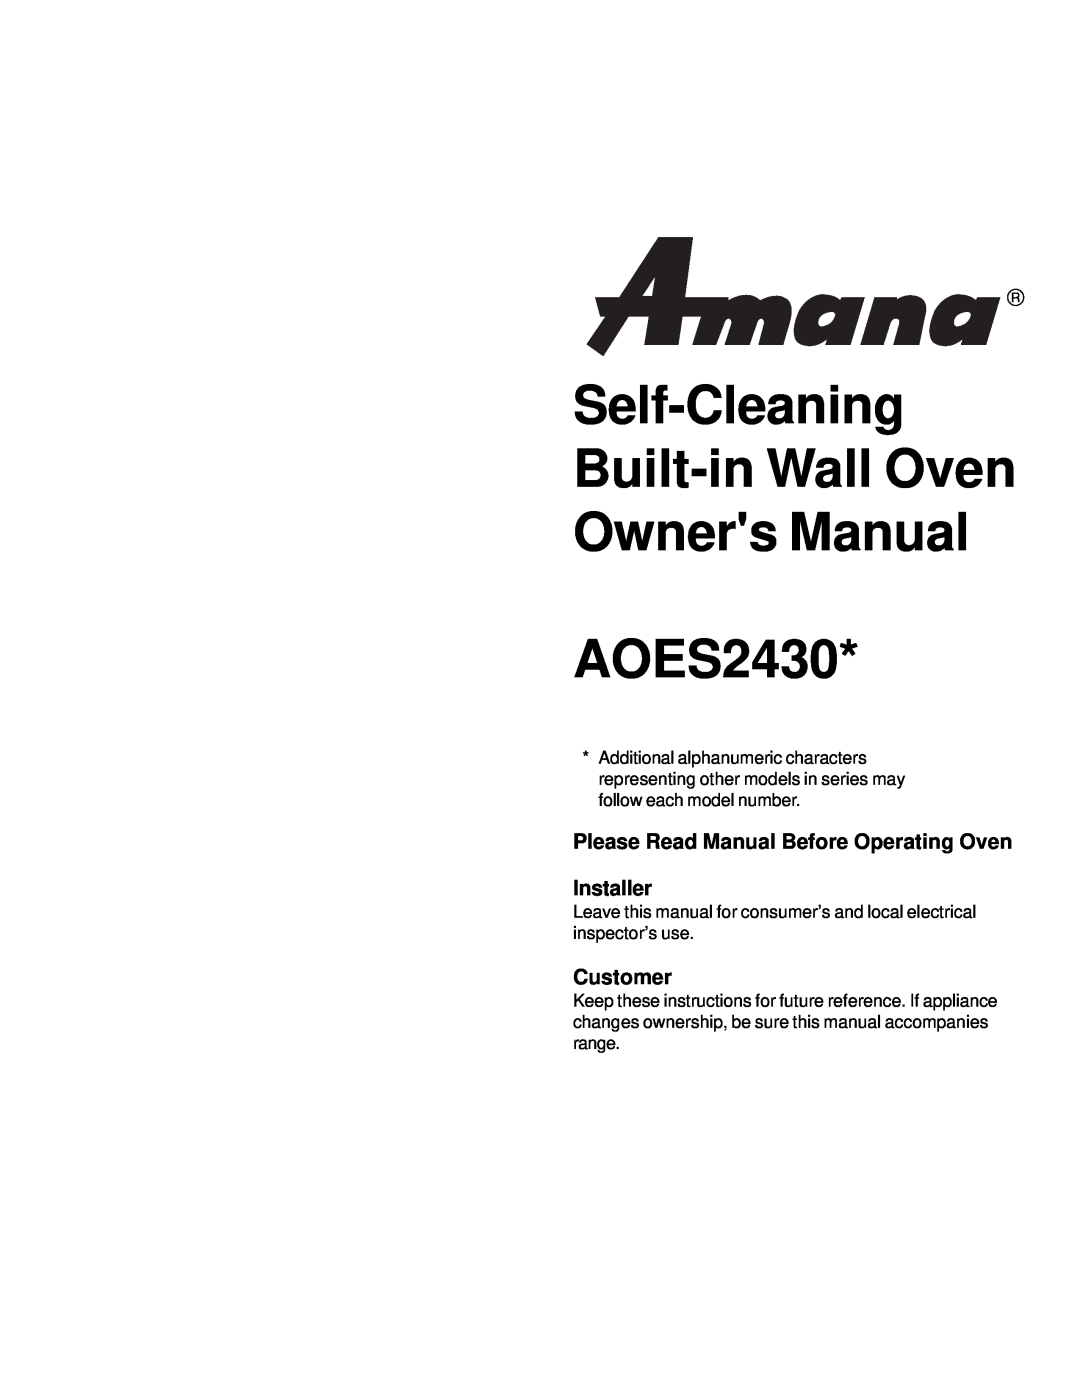 Amana AOES2430 owner manual Please Read Manual Before Operating Oven Installer, Customer 